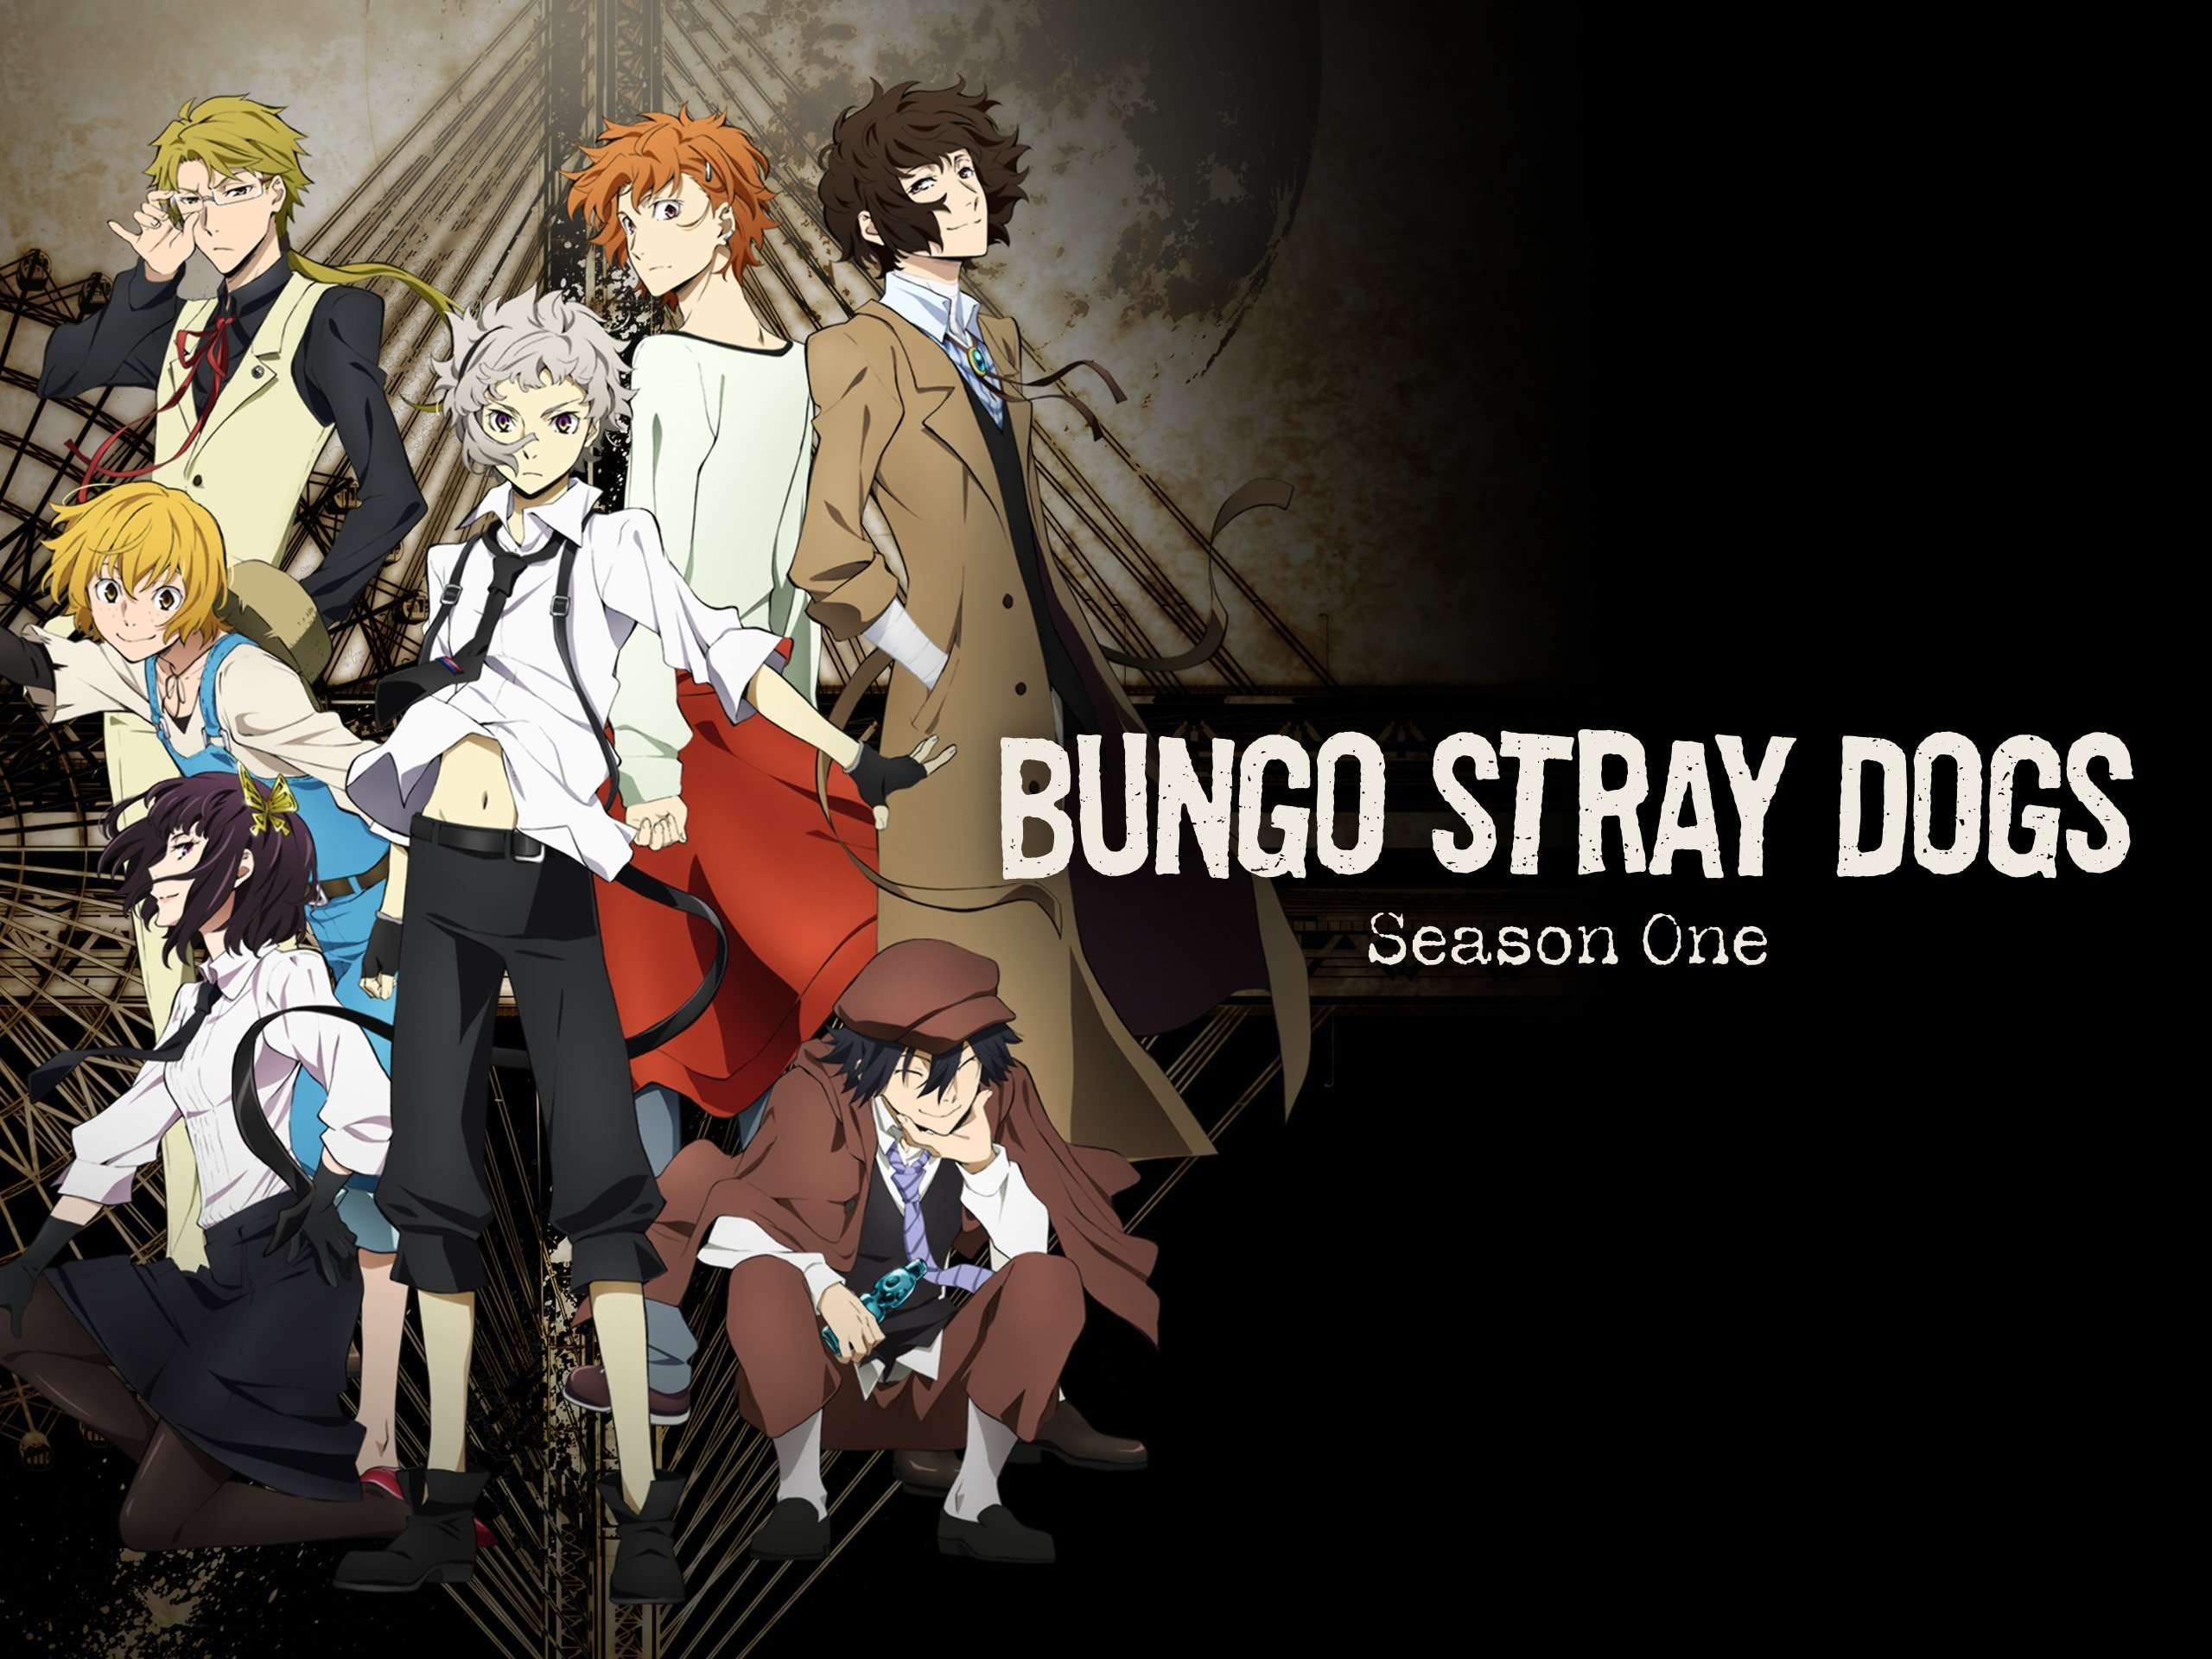 When Will Bungou Stray Dogs Season 4 Get Released?